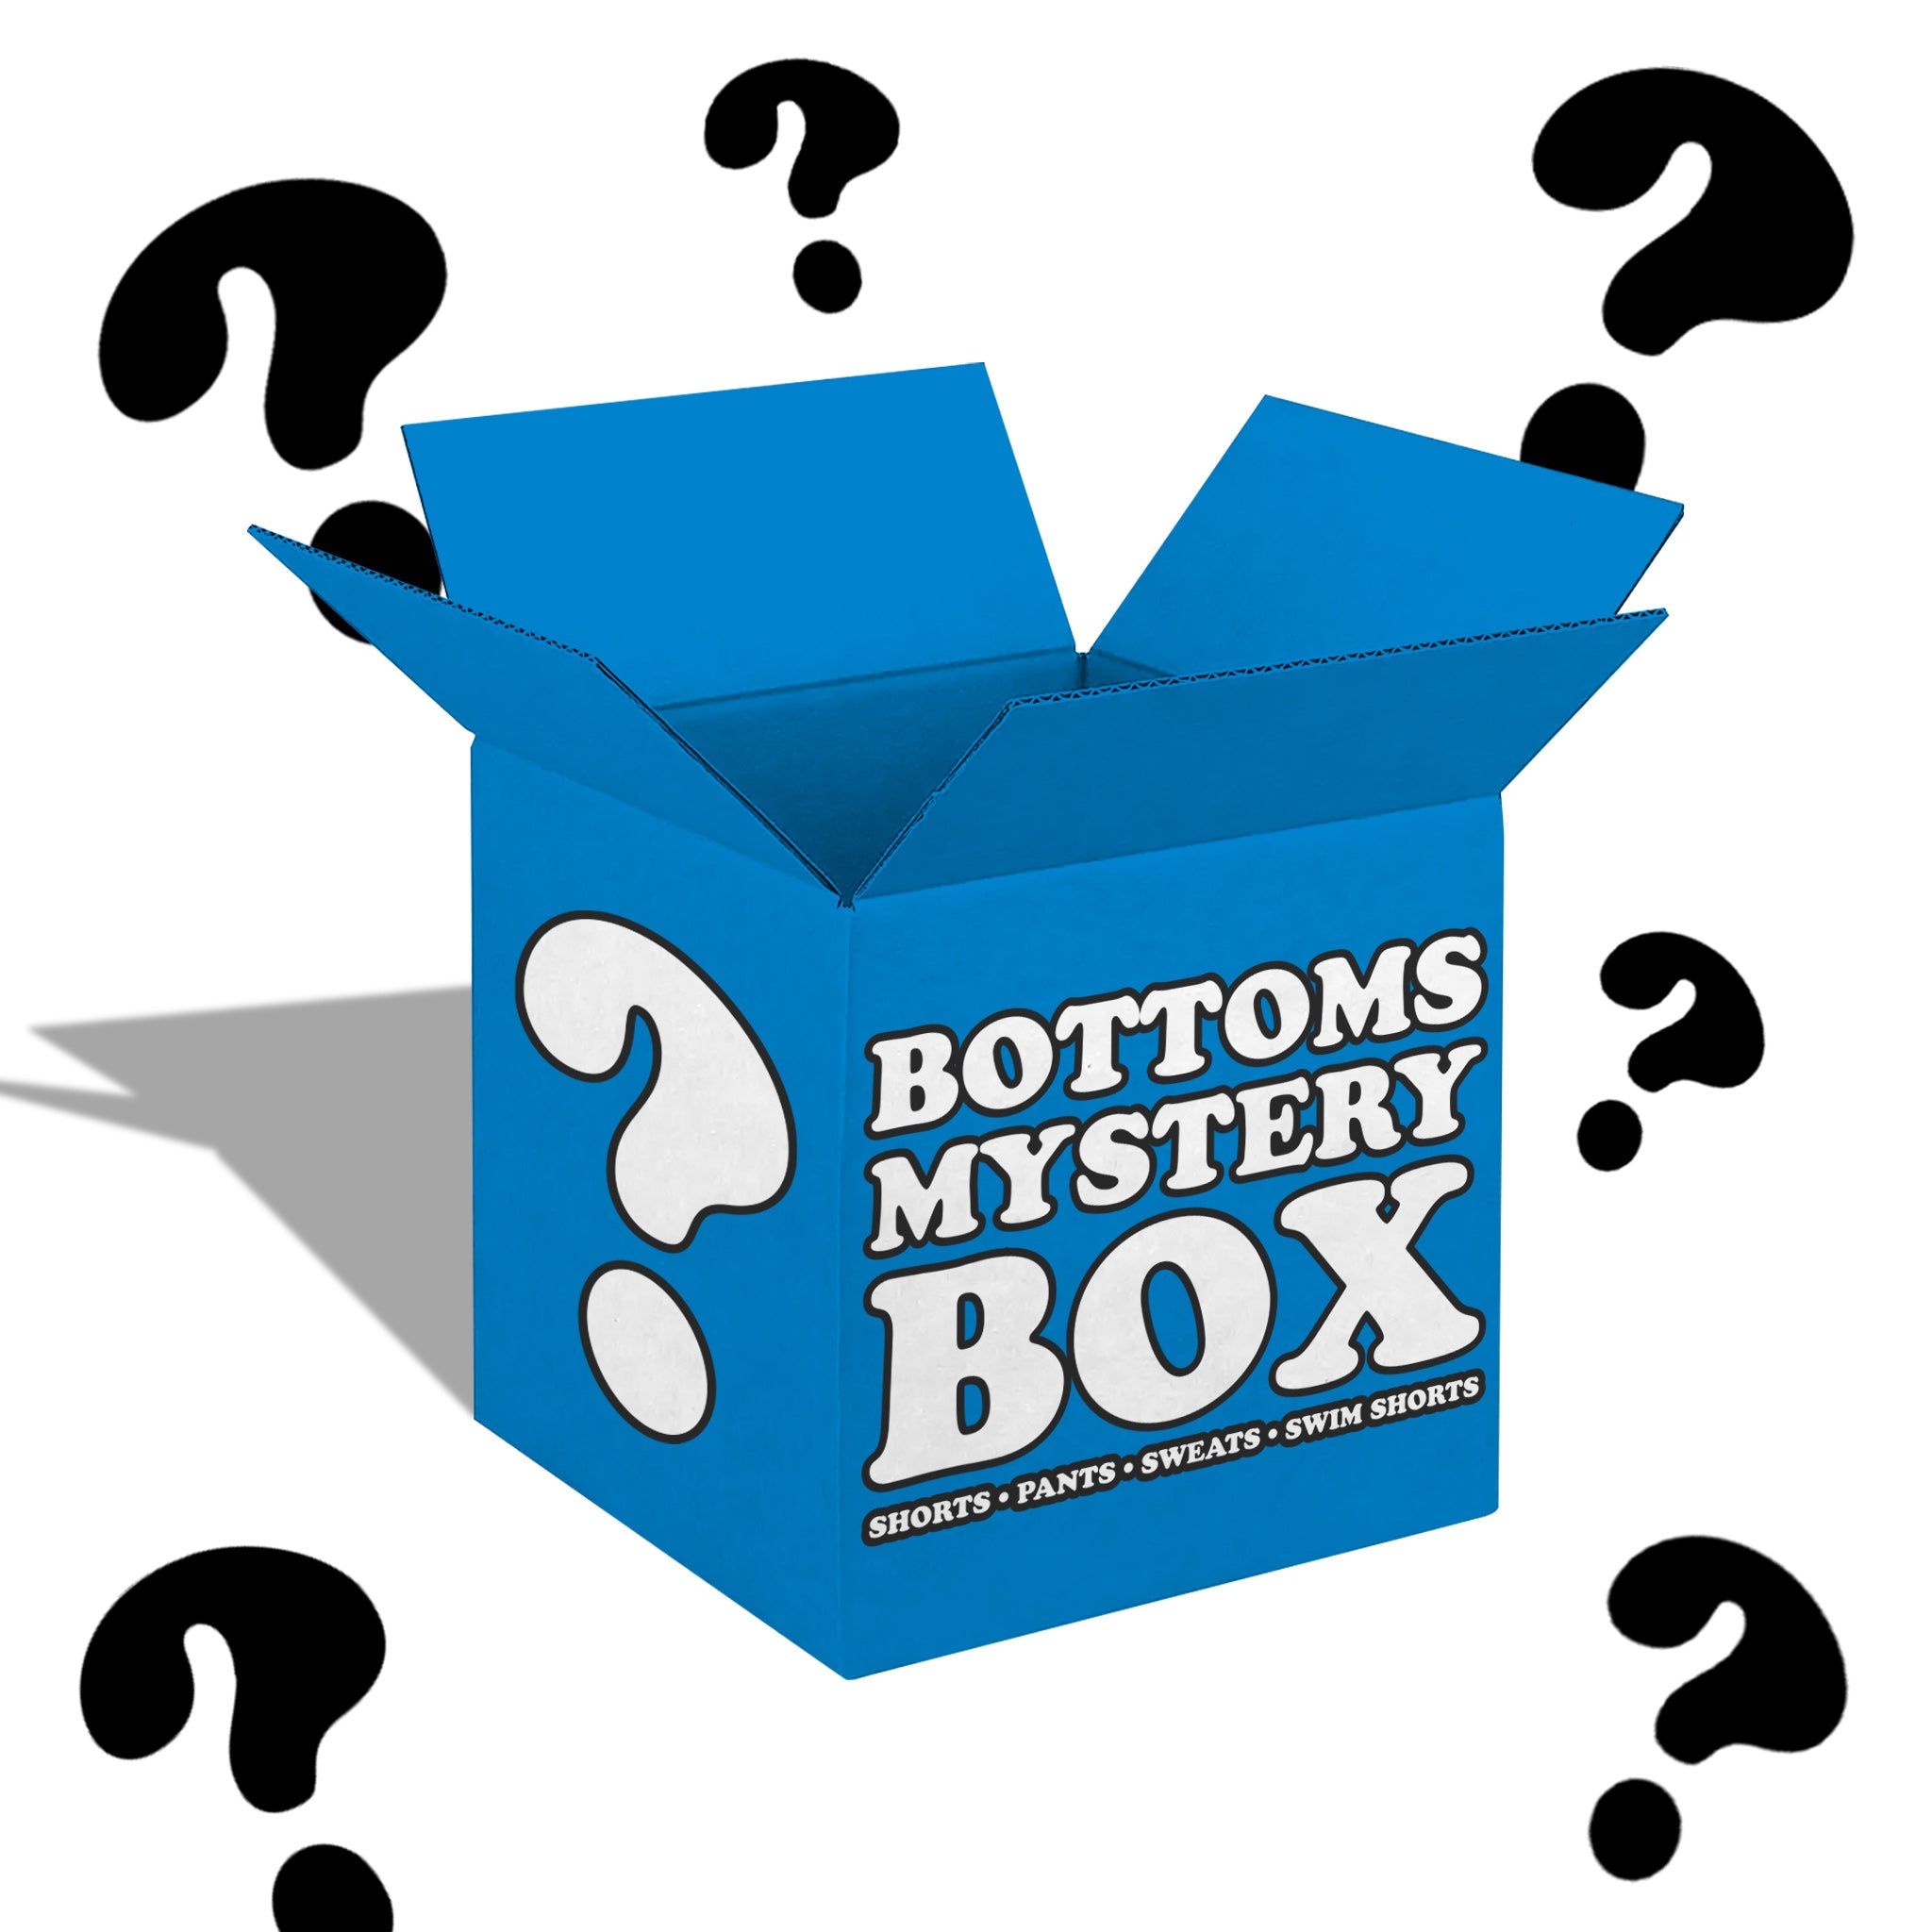 Bottoms Mystery Box (Shorts and Pants)